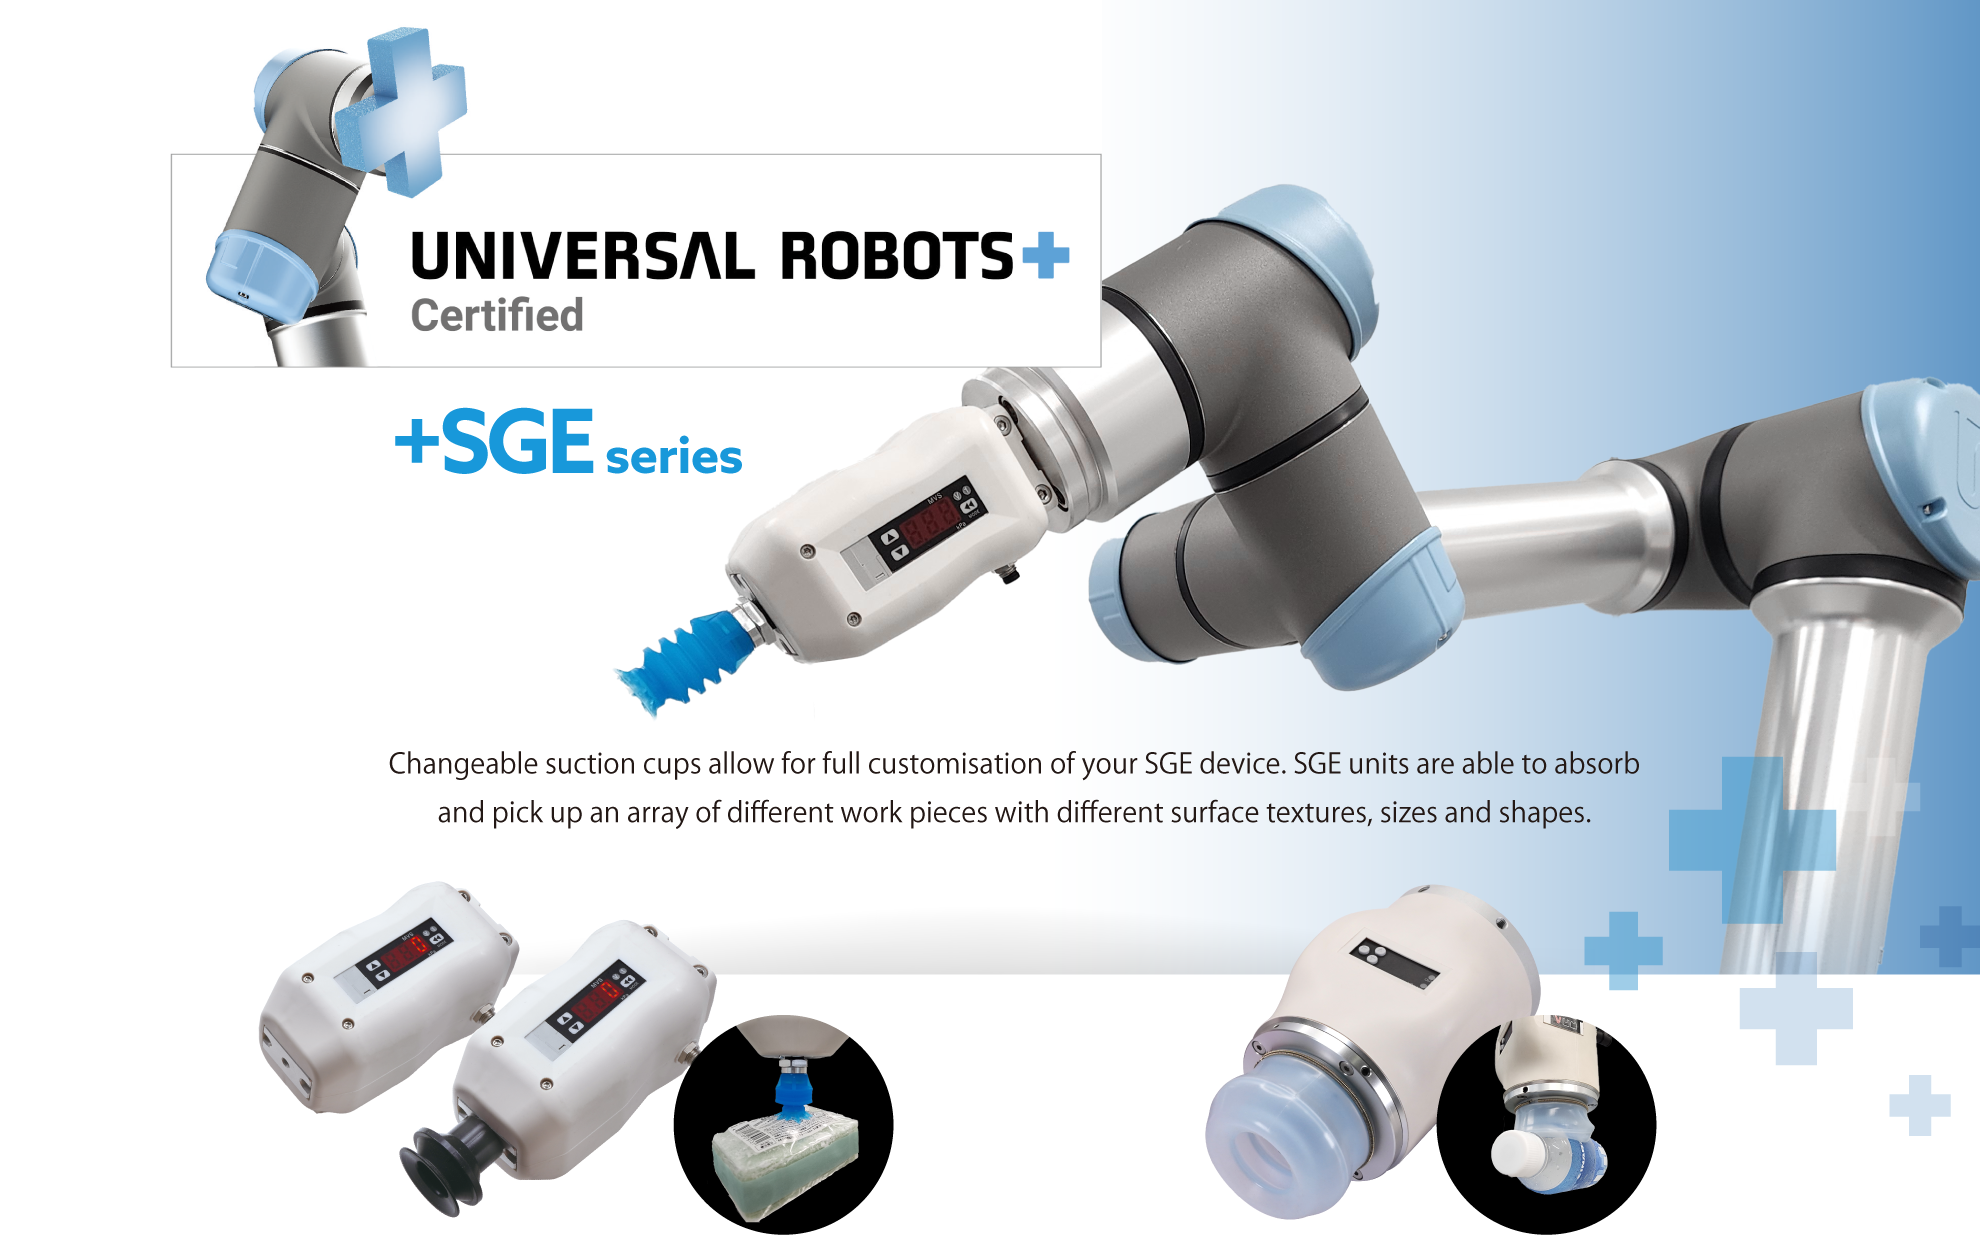 UNIVERSAL ROBOTS + Certified + SGE series